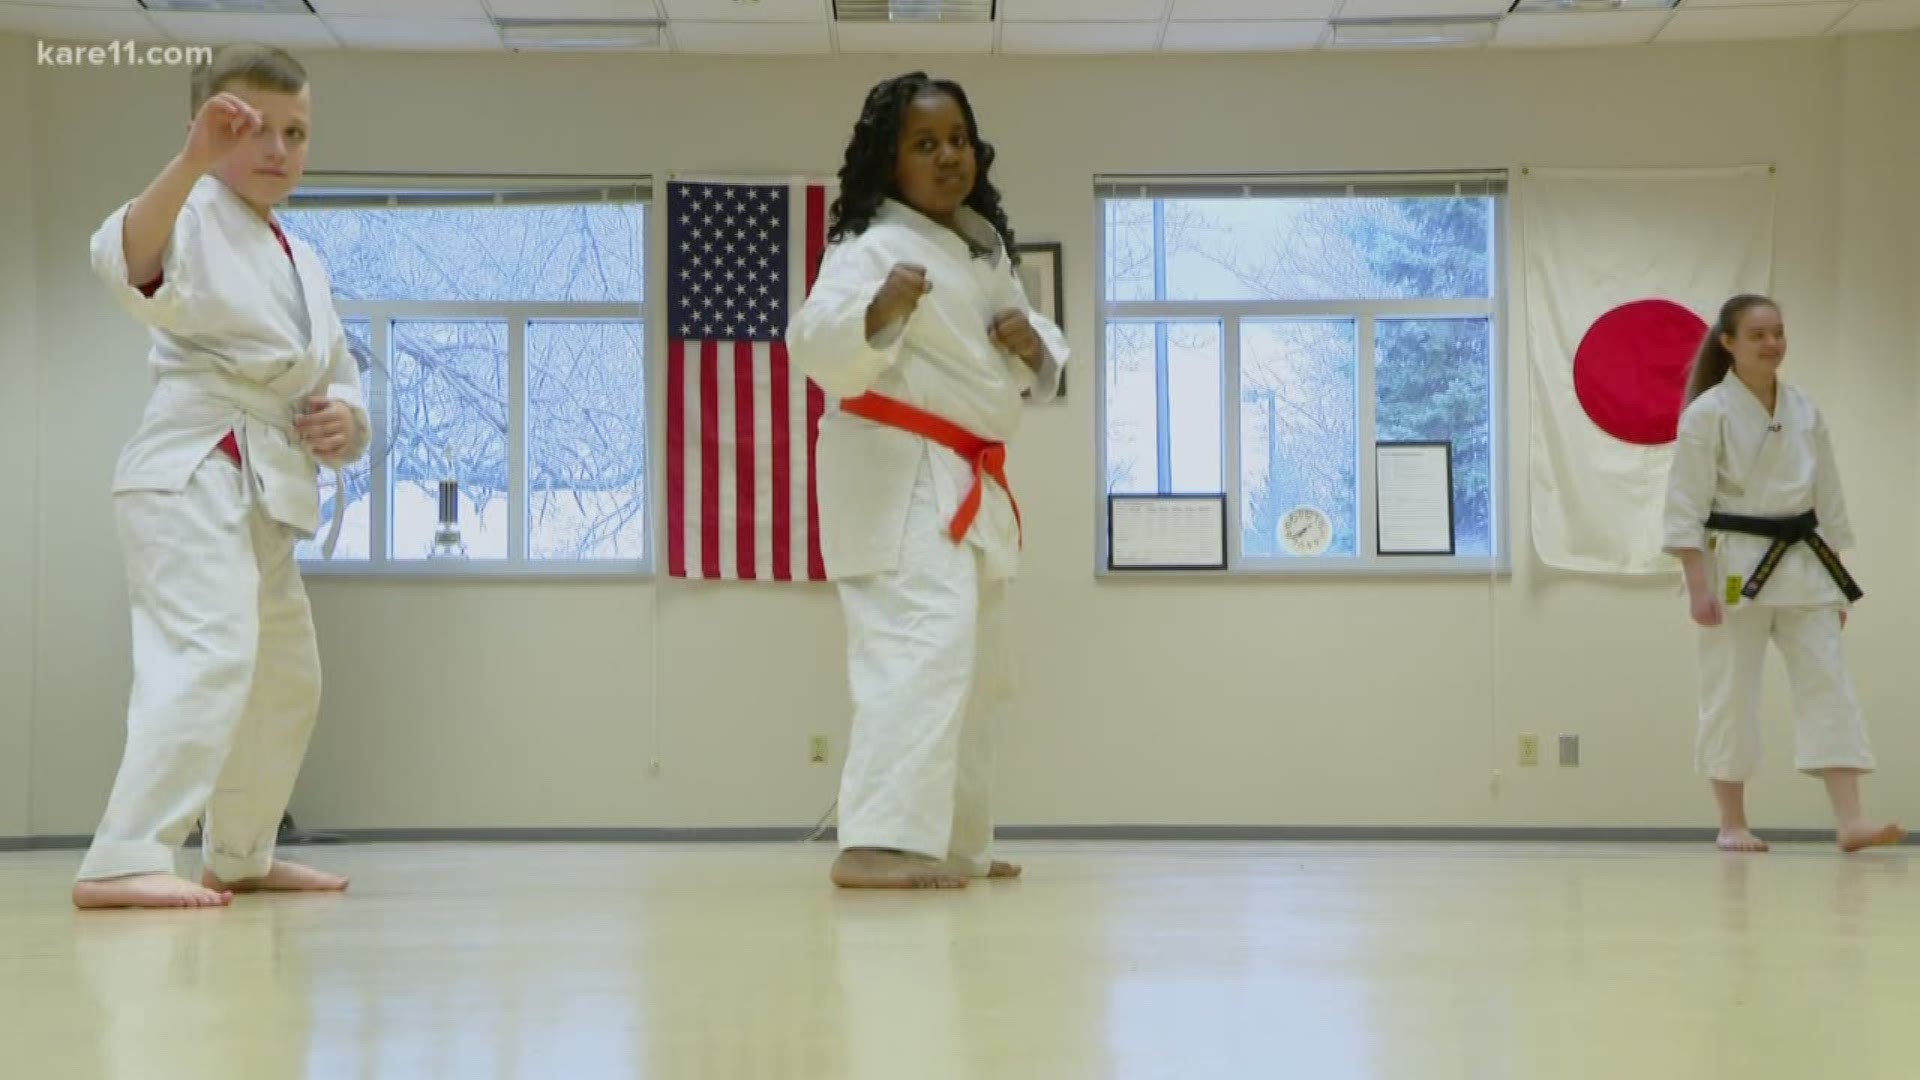 The Ann Bancroft Foundation is helping a girl take karate lessons after she had been bullied.